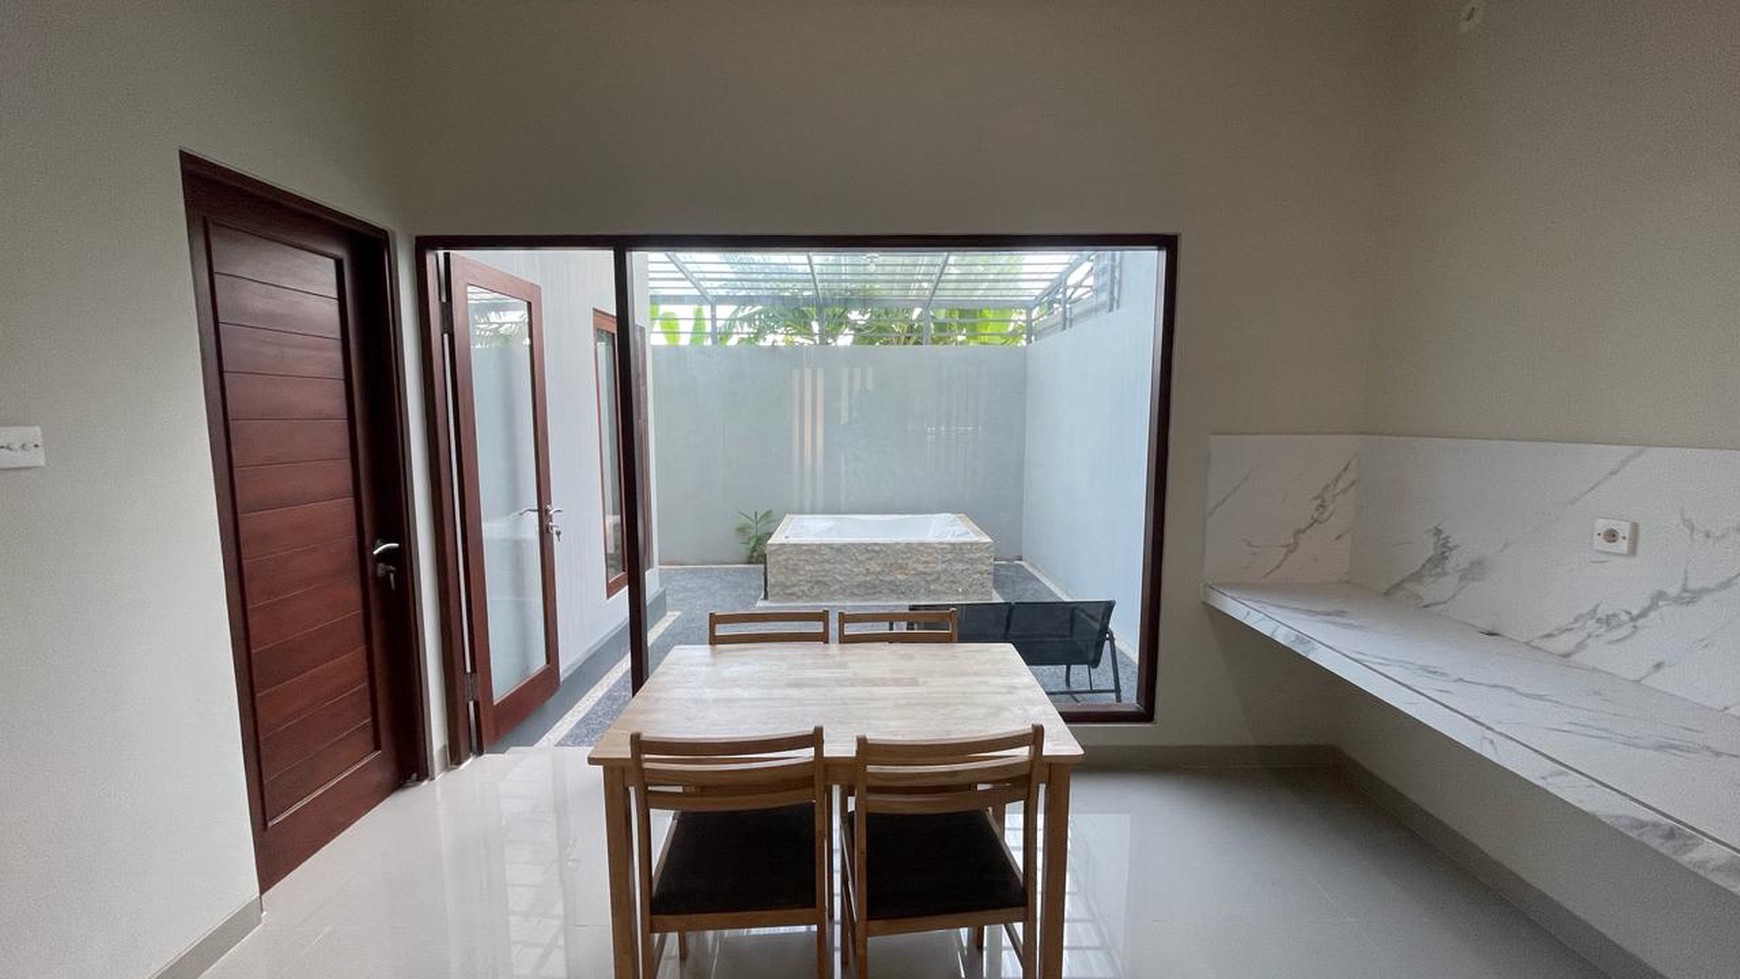 For Rent Yearly - Brand new minimalis modern house in Sanur